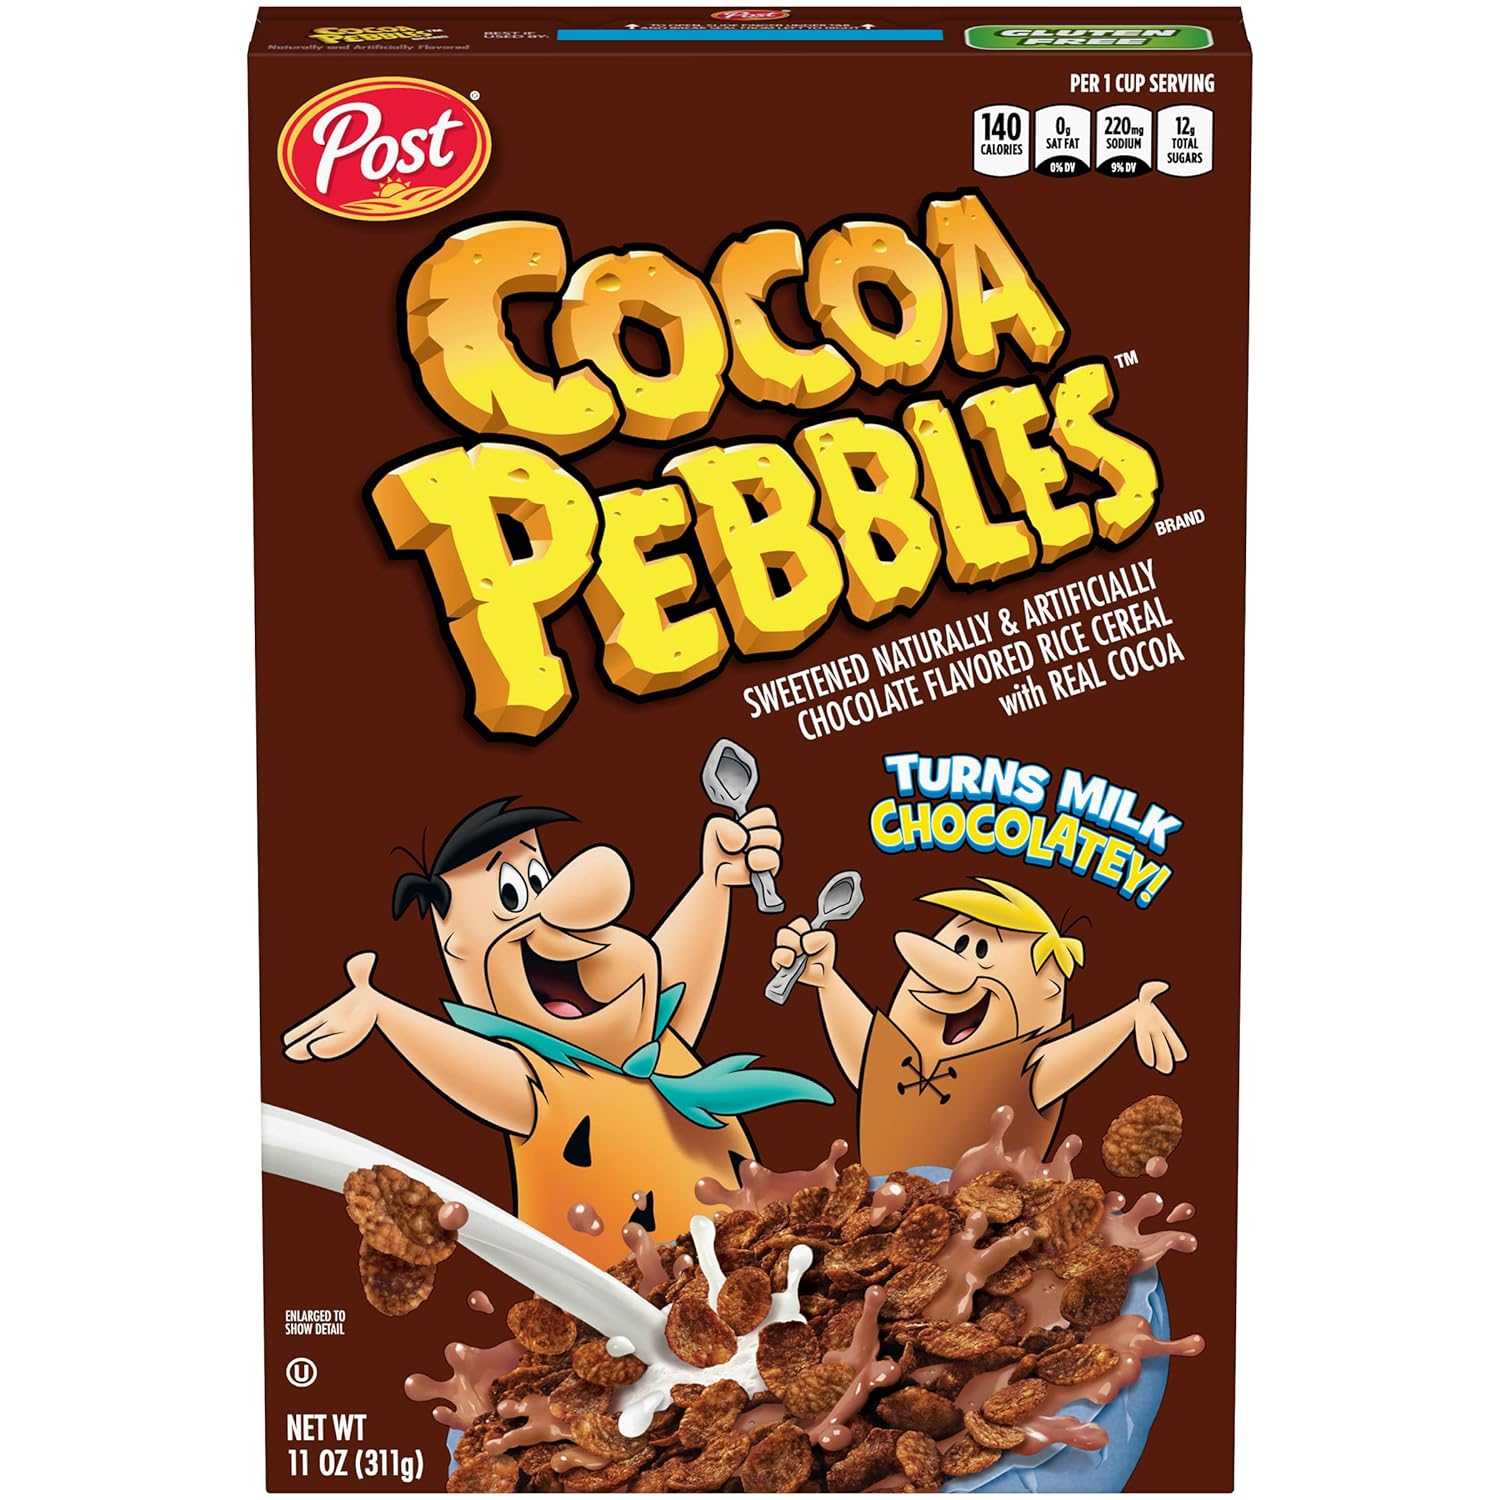 Pebbles Cocoa PEBBLES Cereal, Chocolatey Kids Cereal, Gluten Free Rice Cereal, 11 OZ Cereal Box